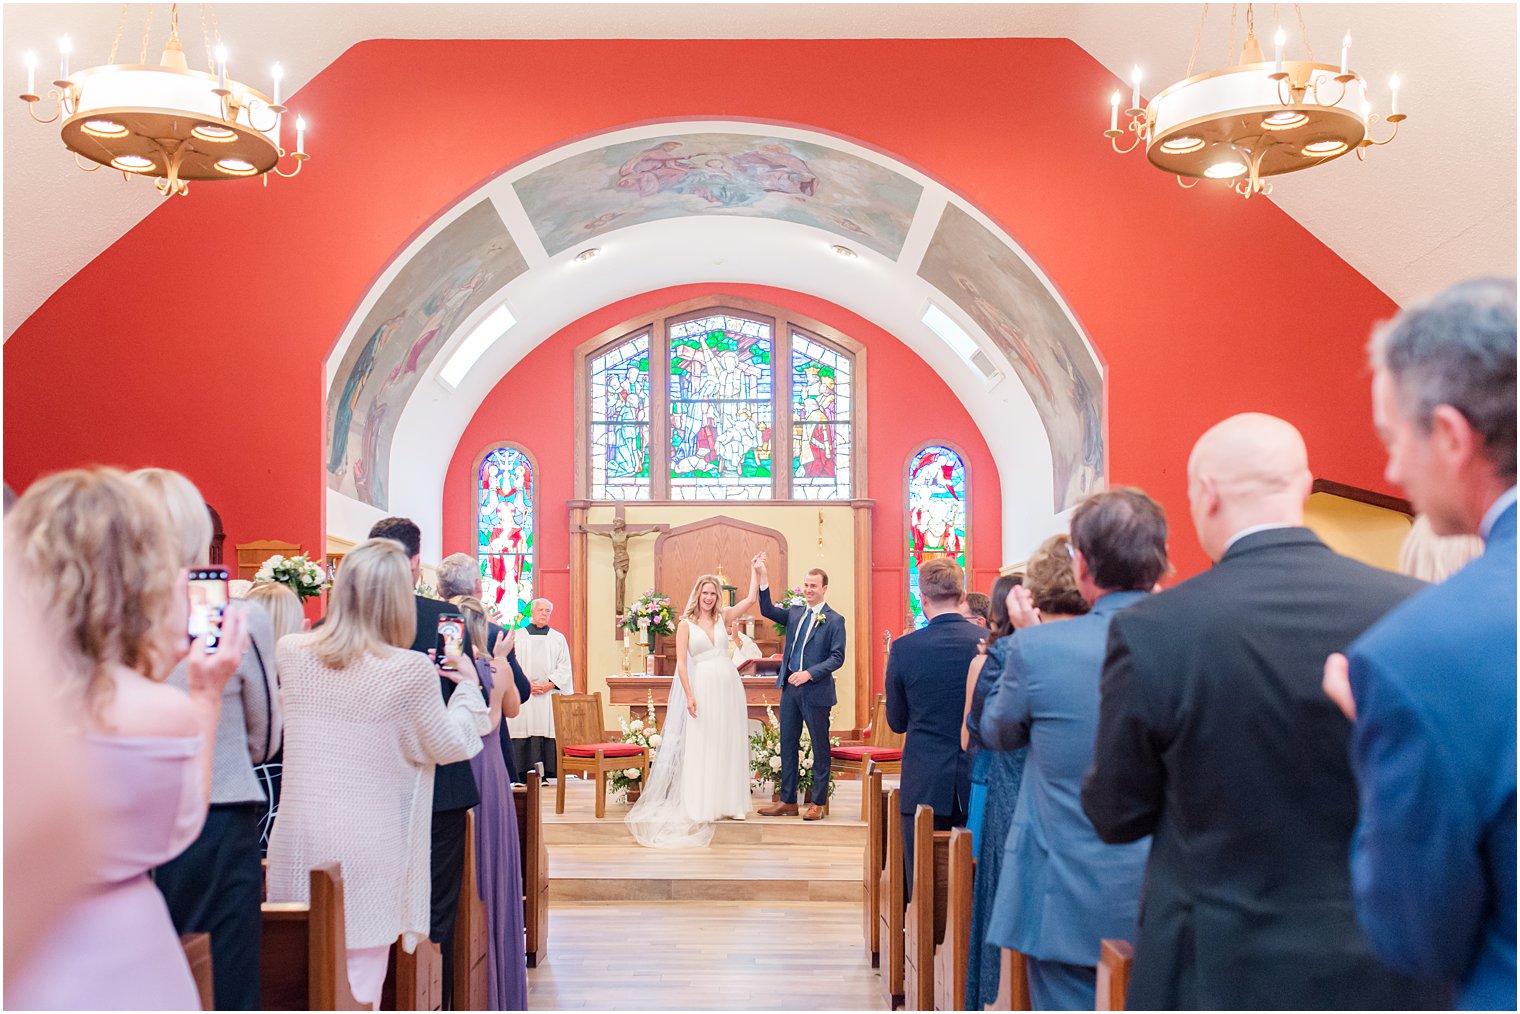 bride and groom cheer after wedding ceremony in red church